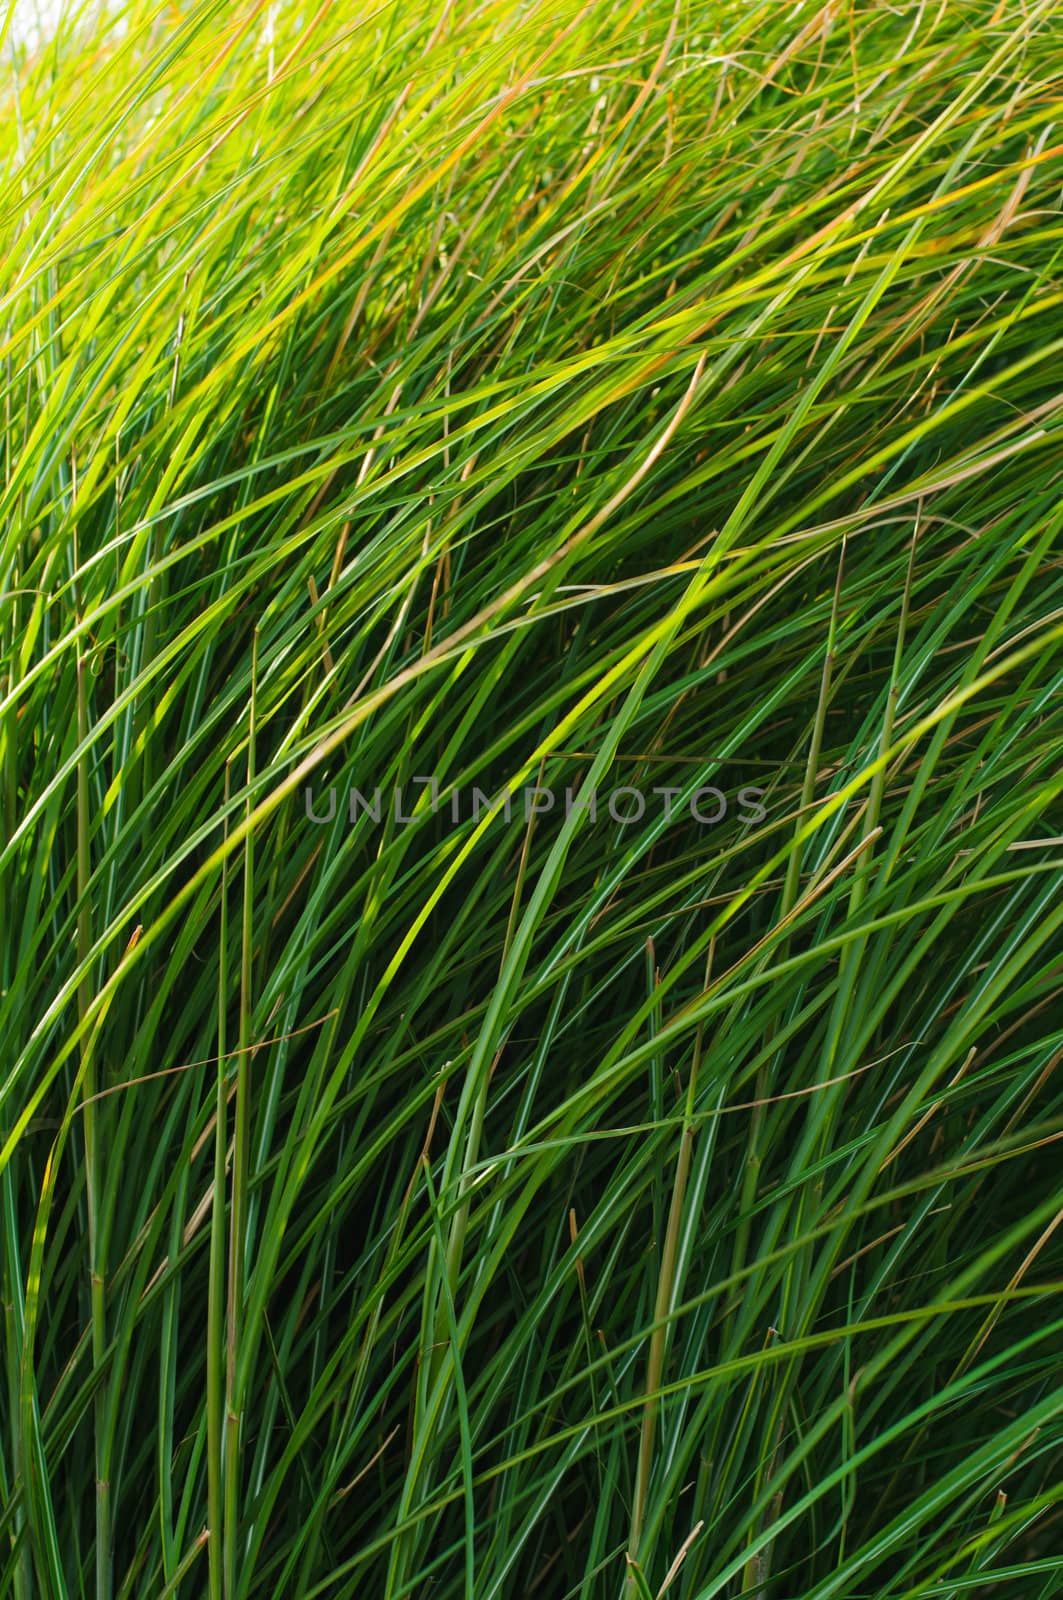 Close-up of many green grass blades as a background